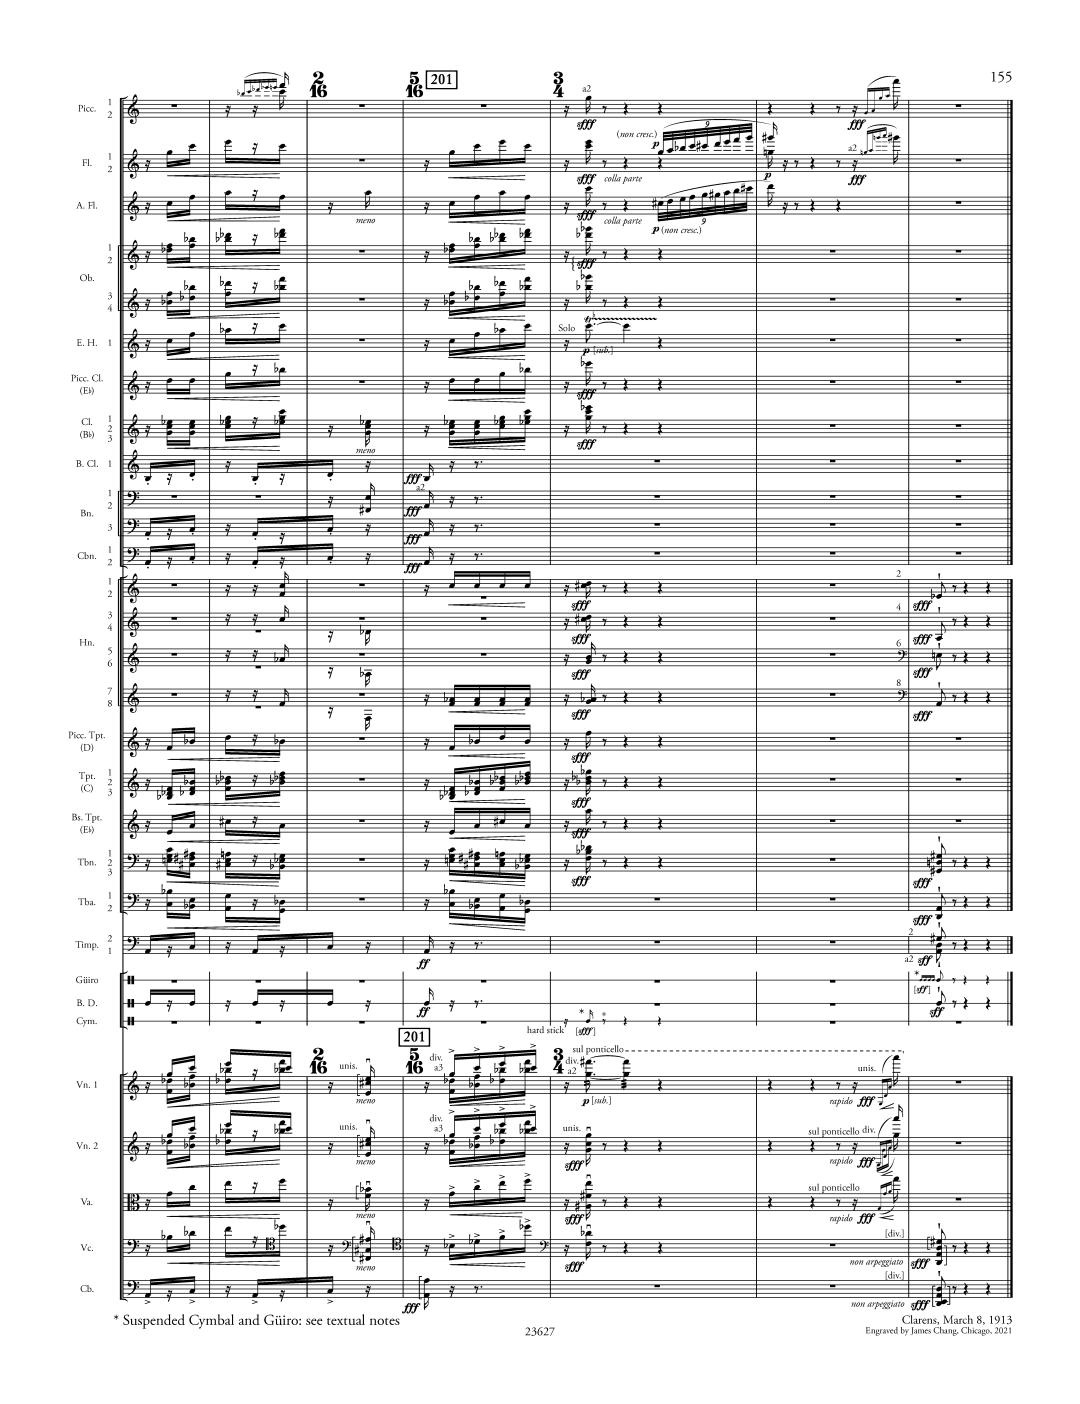 Last page of the new Rite of Spring score